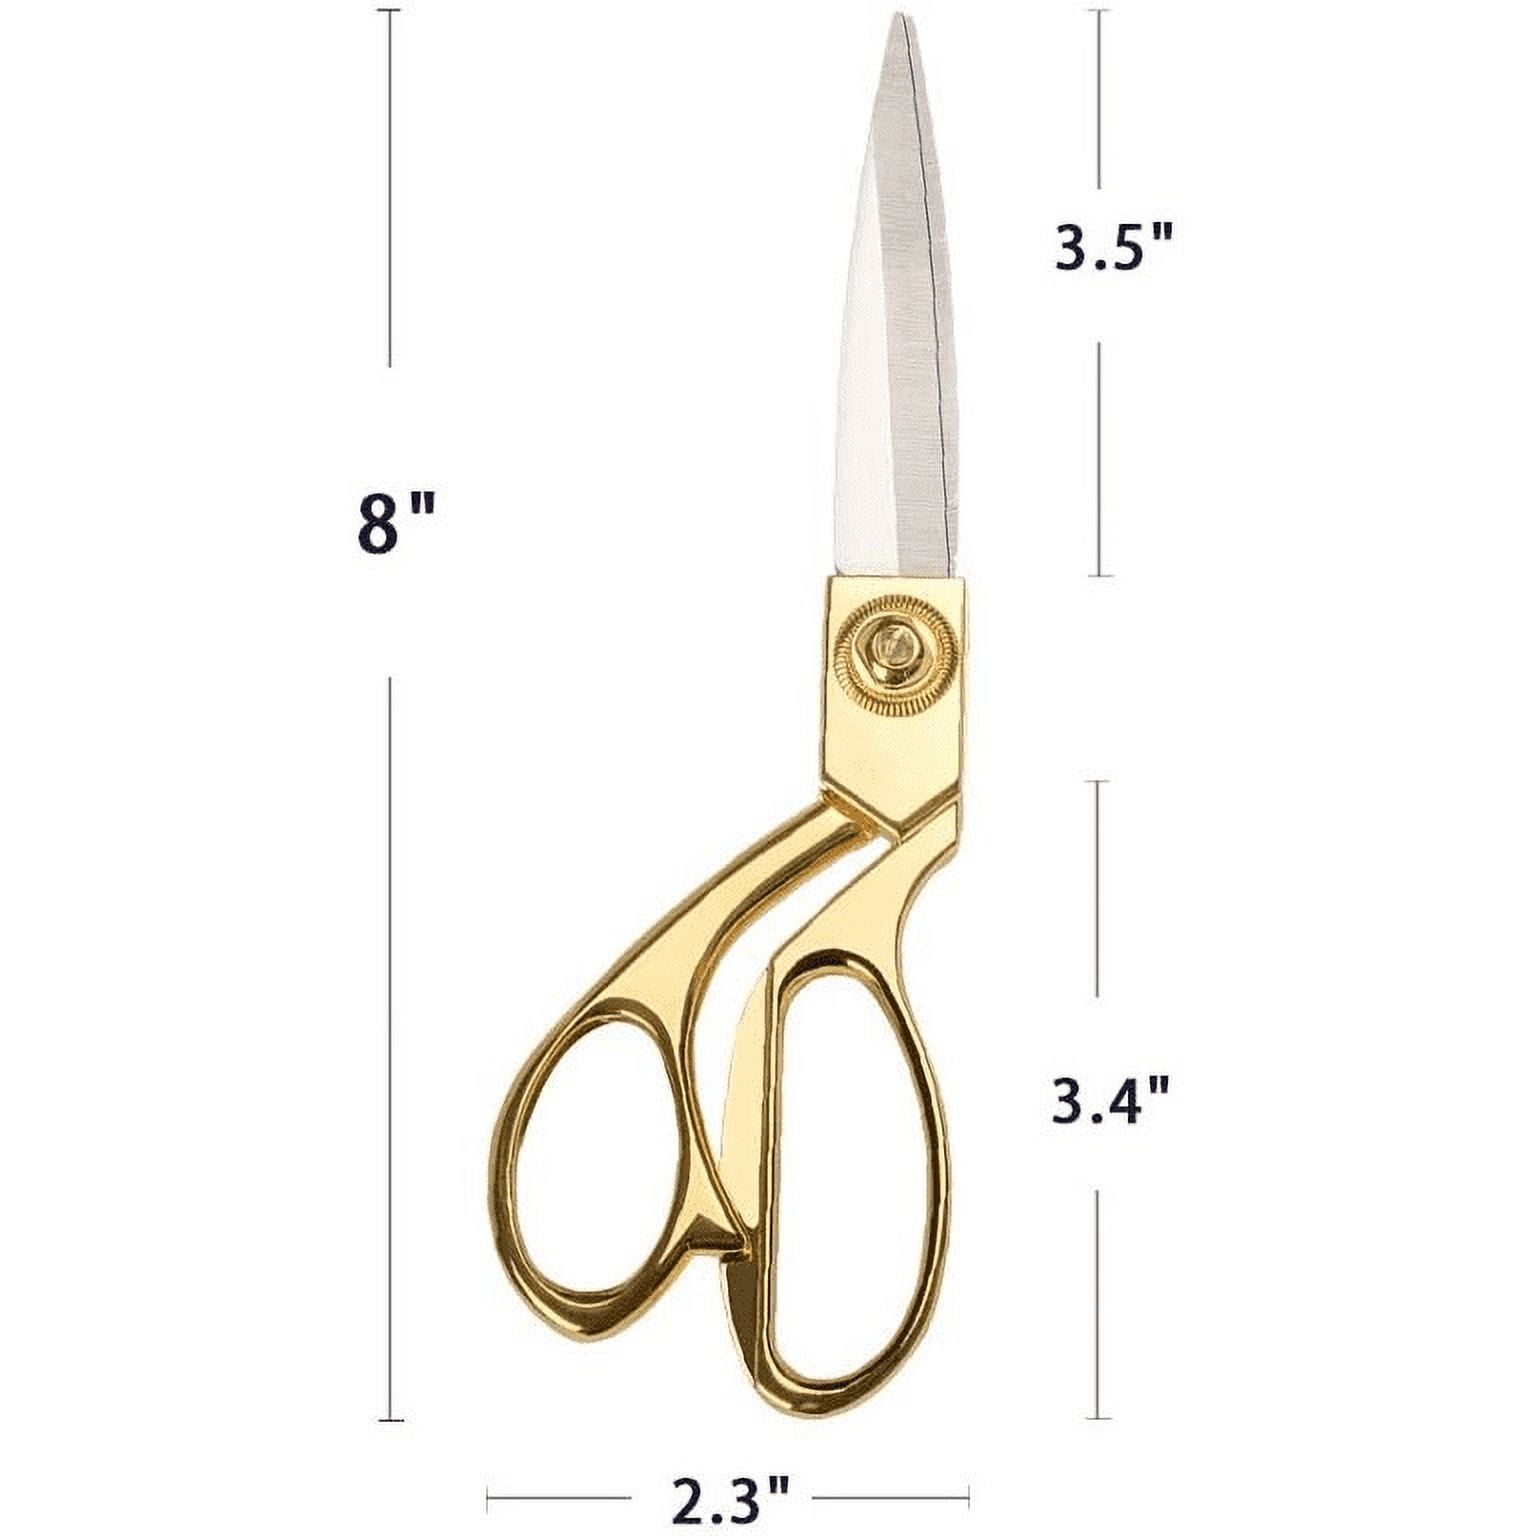 Heavy Duty All Metal Stainless Steel Shears Craft Scissors Tailor